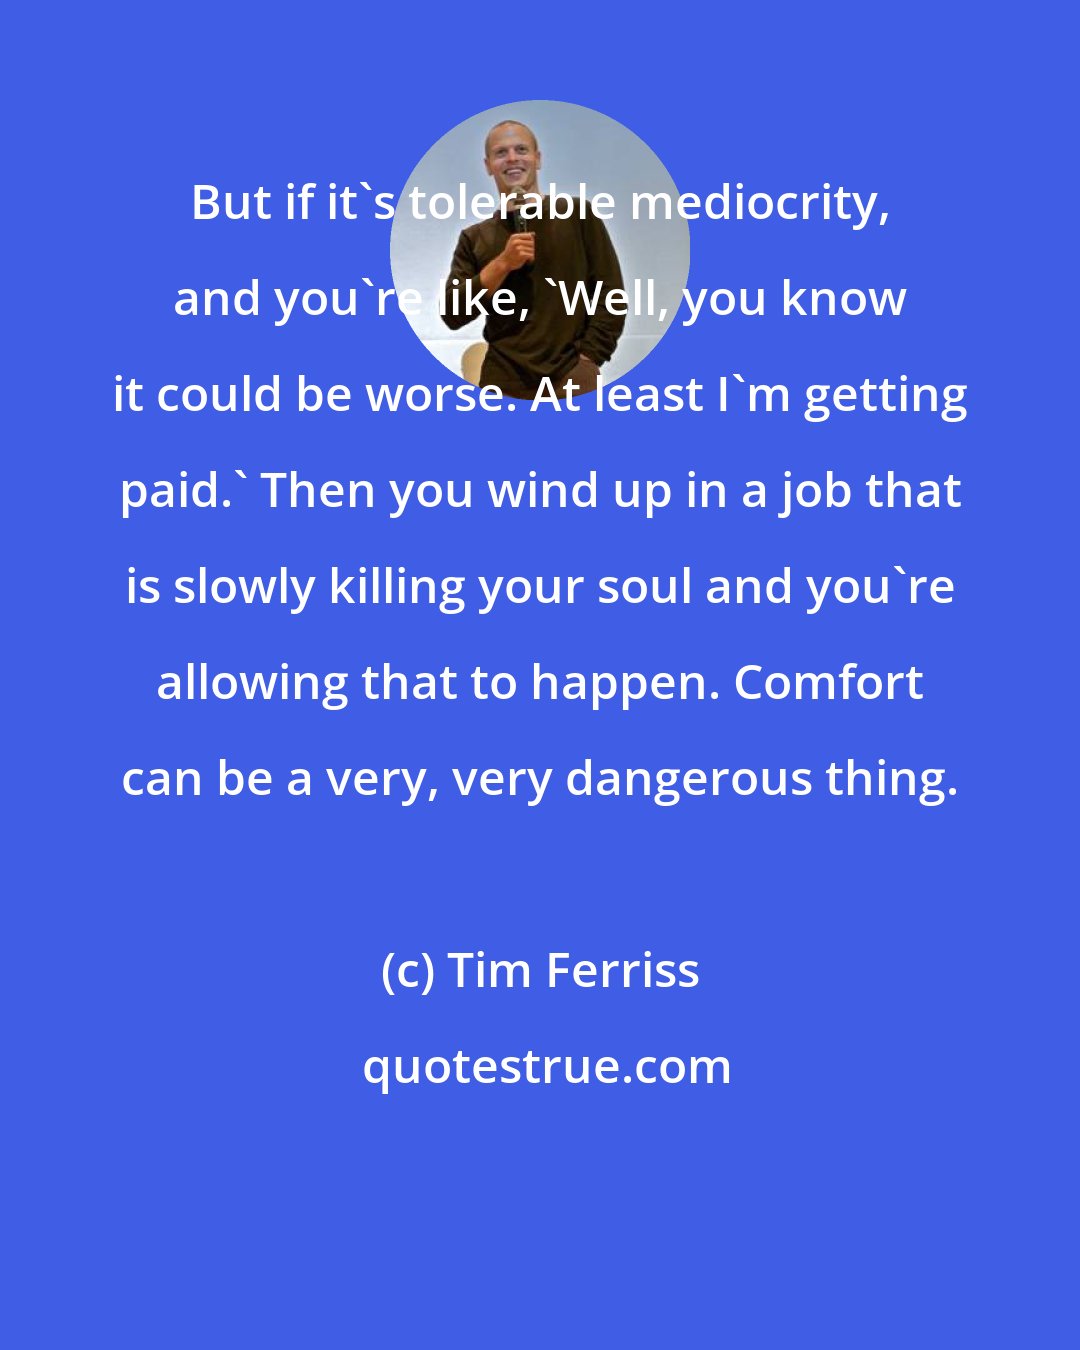 Tim Ferriss: But if it's tolerable mediocrity, and you're like, 'Well, you know it could be worse. At least I'm getting paid.' Then you wind up in a job that is slowly killing your soul and you're allowing that to happen. Comfort can be a very, very dangerous thing.